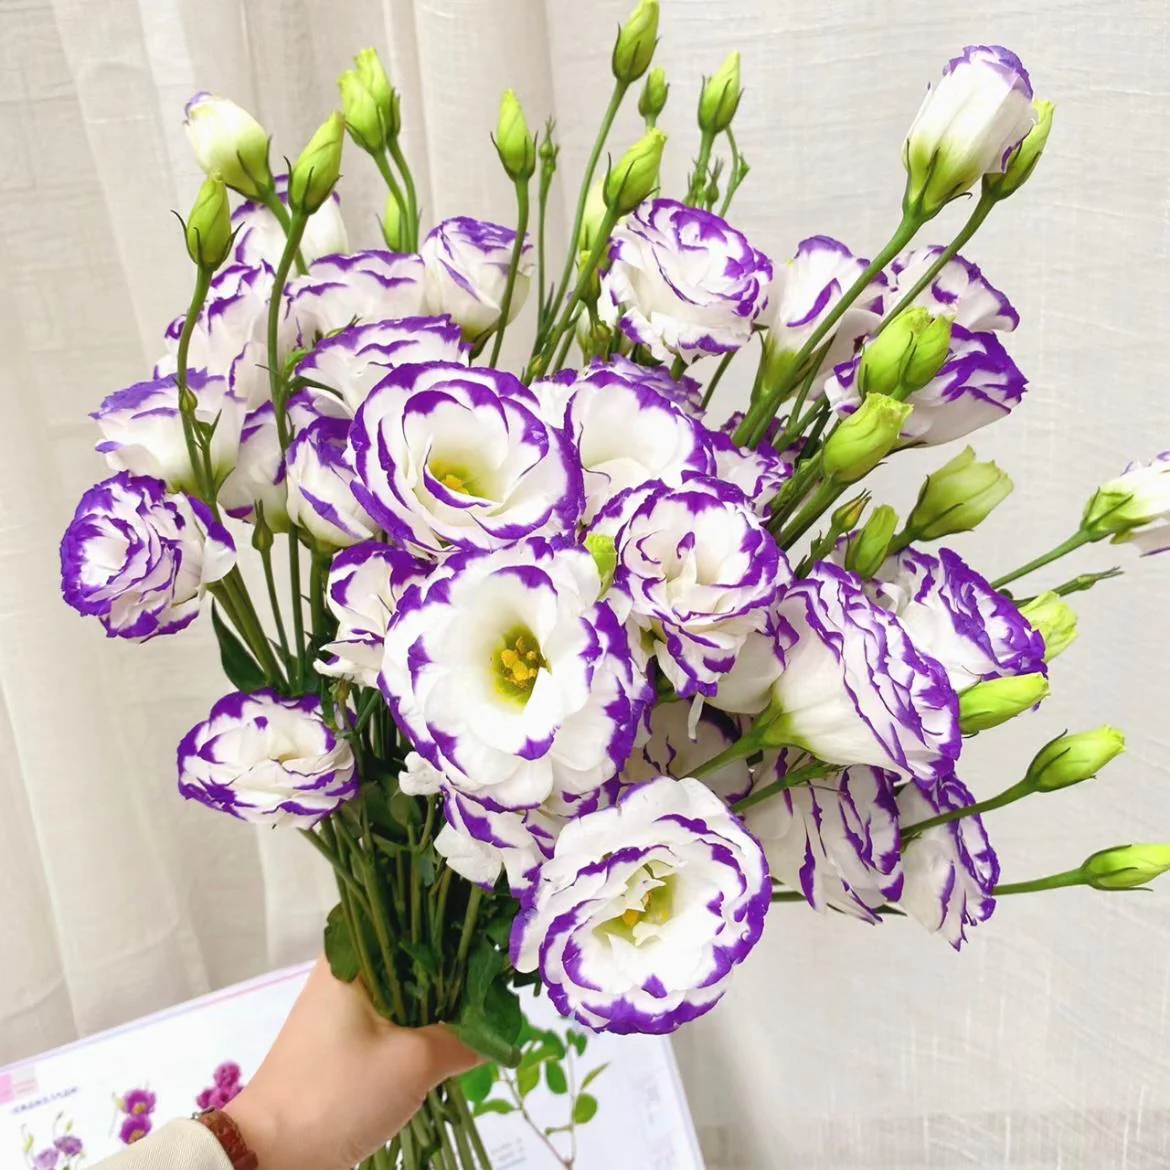 Mixed-Color Lisianthus